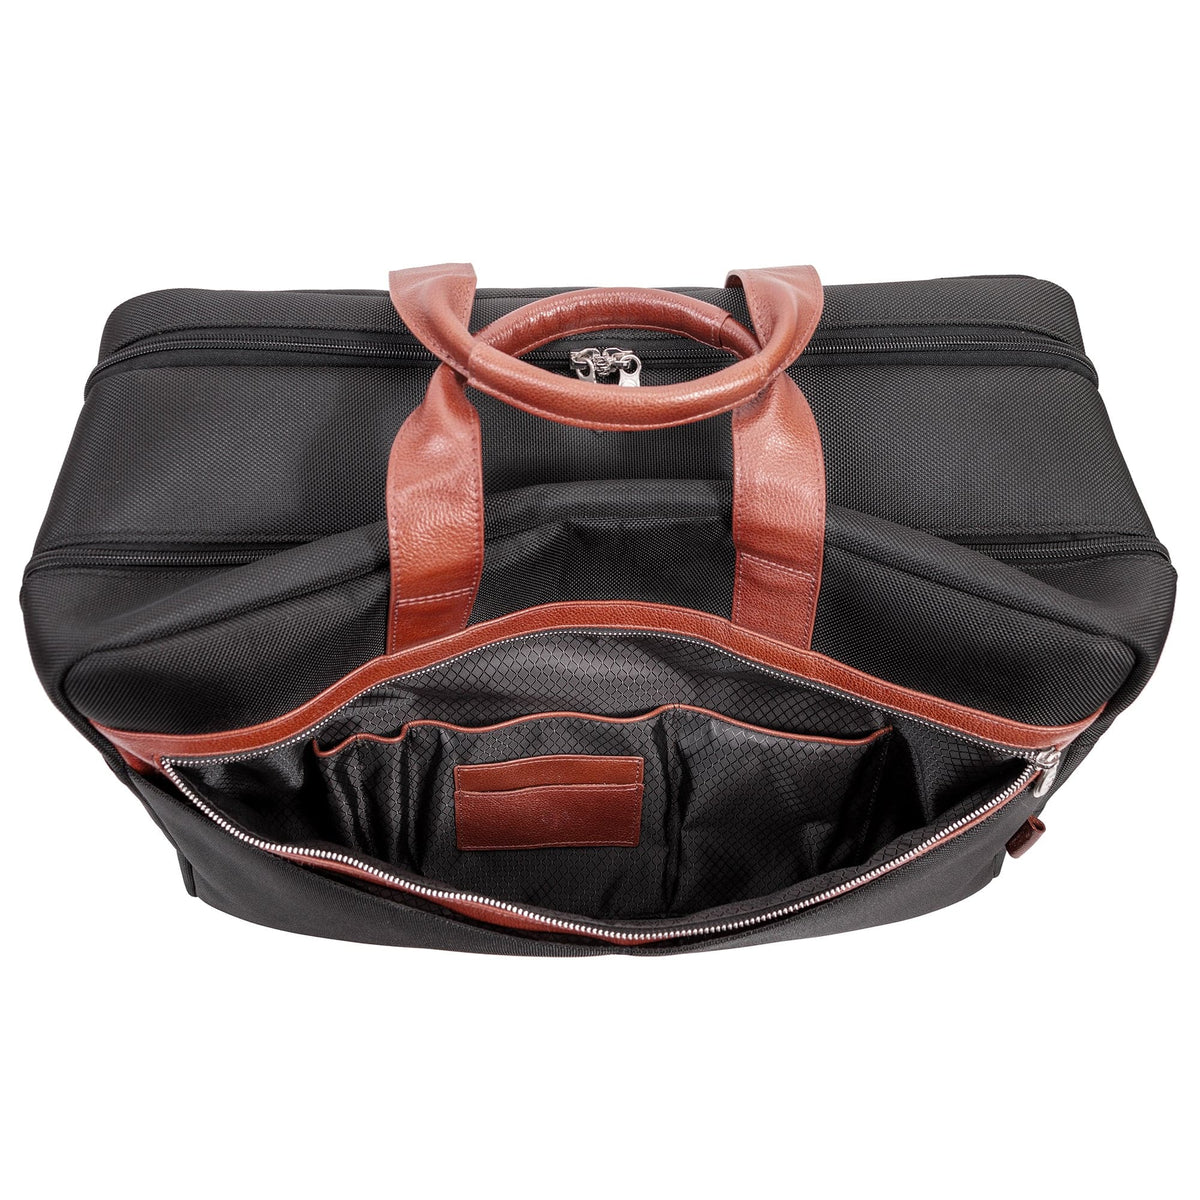 McKlein U Series Wellington 21" Two-tone Dual-Compartment Laptop and Tablet Carry-All Nylon Duffel Bag